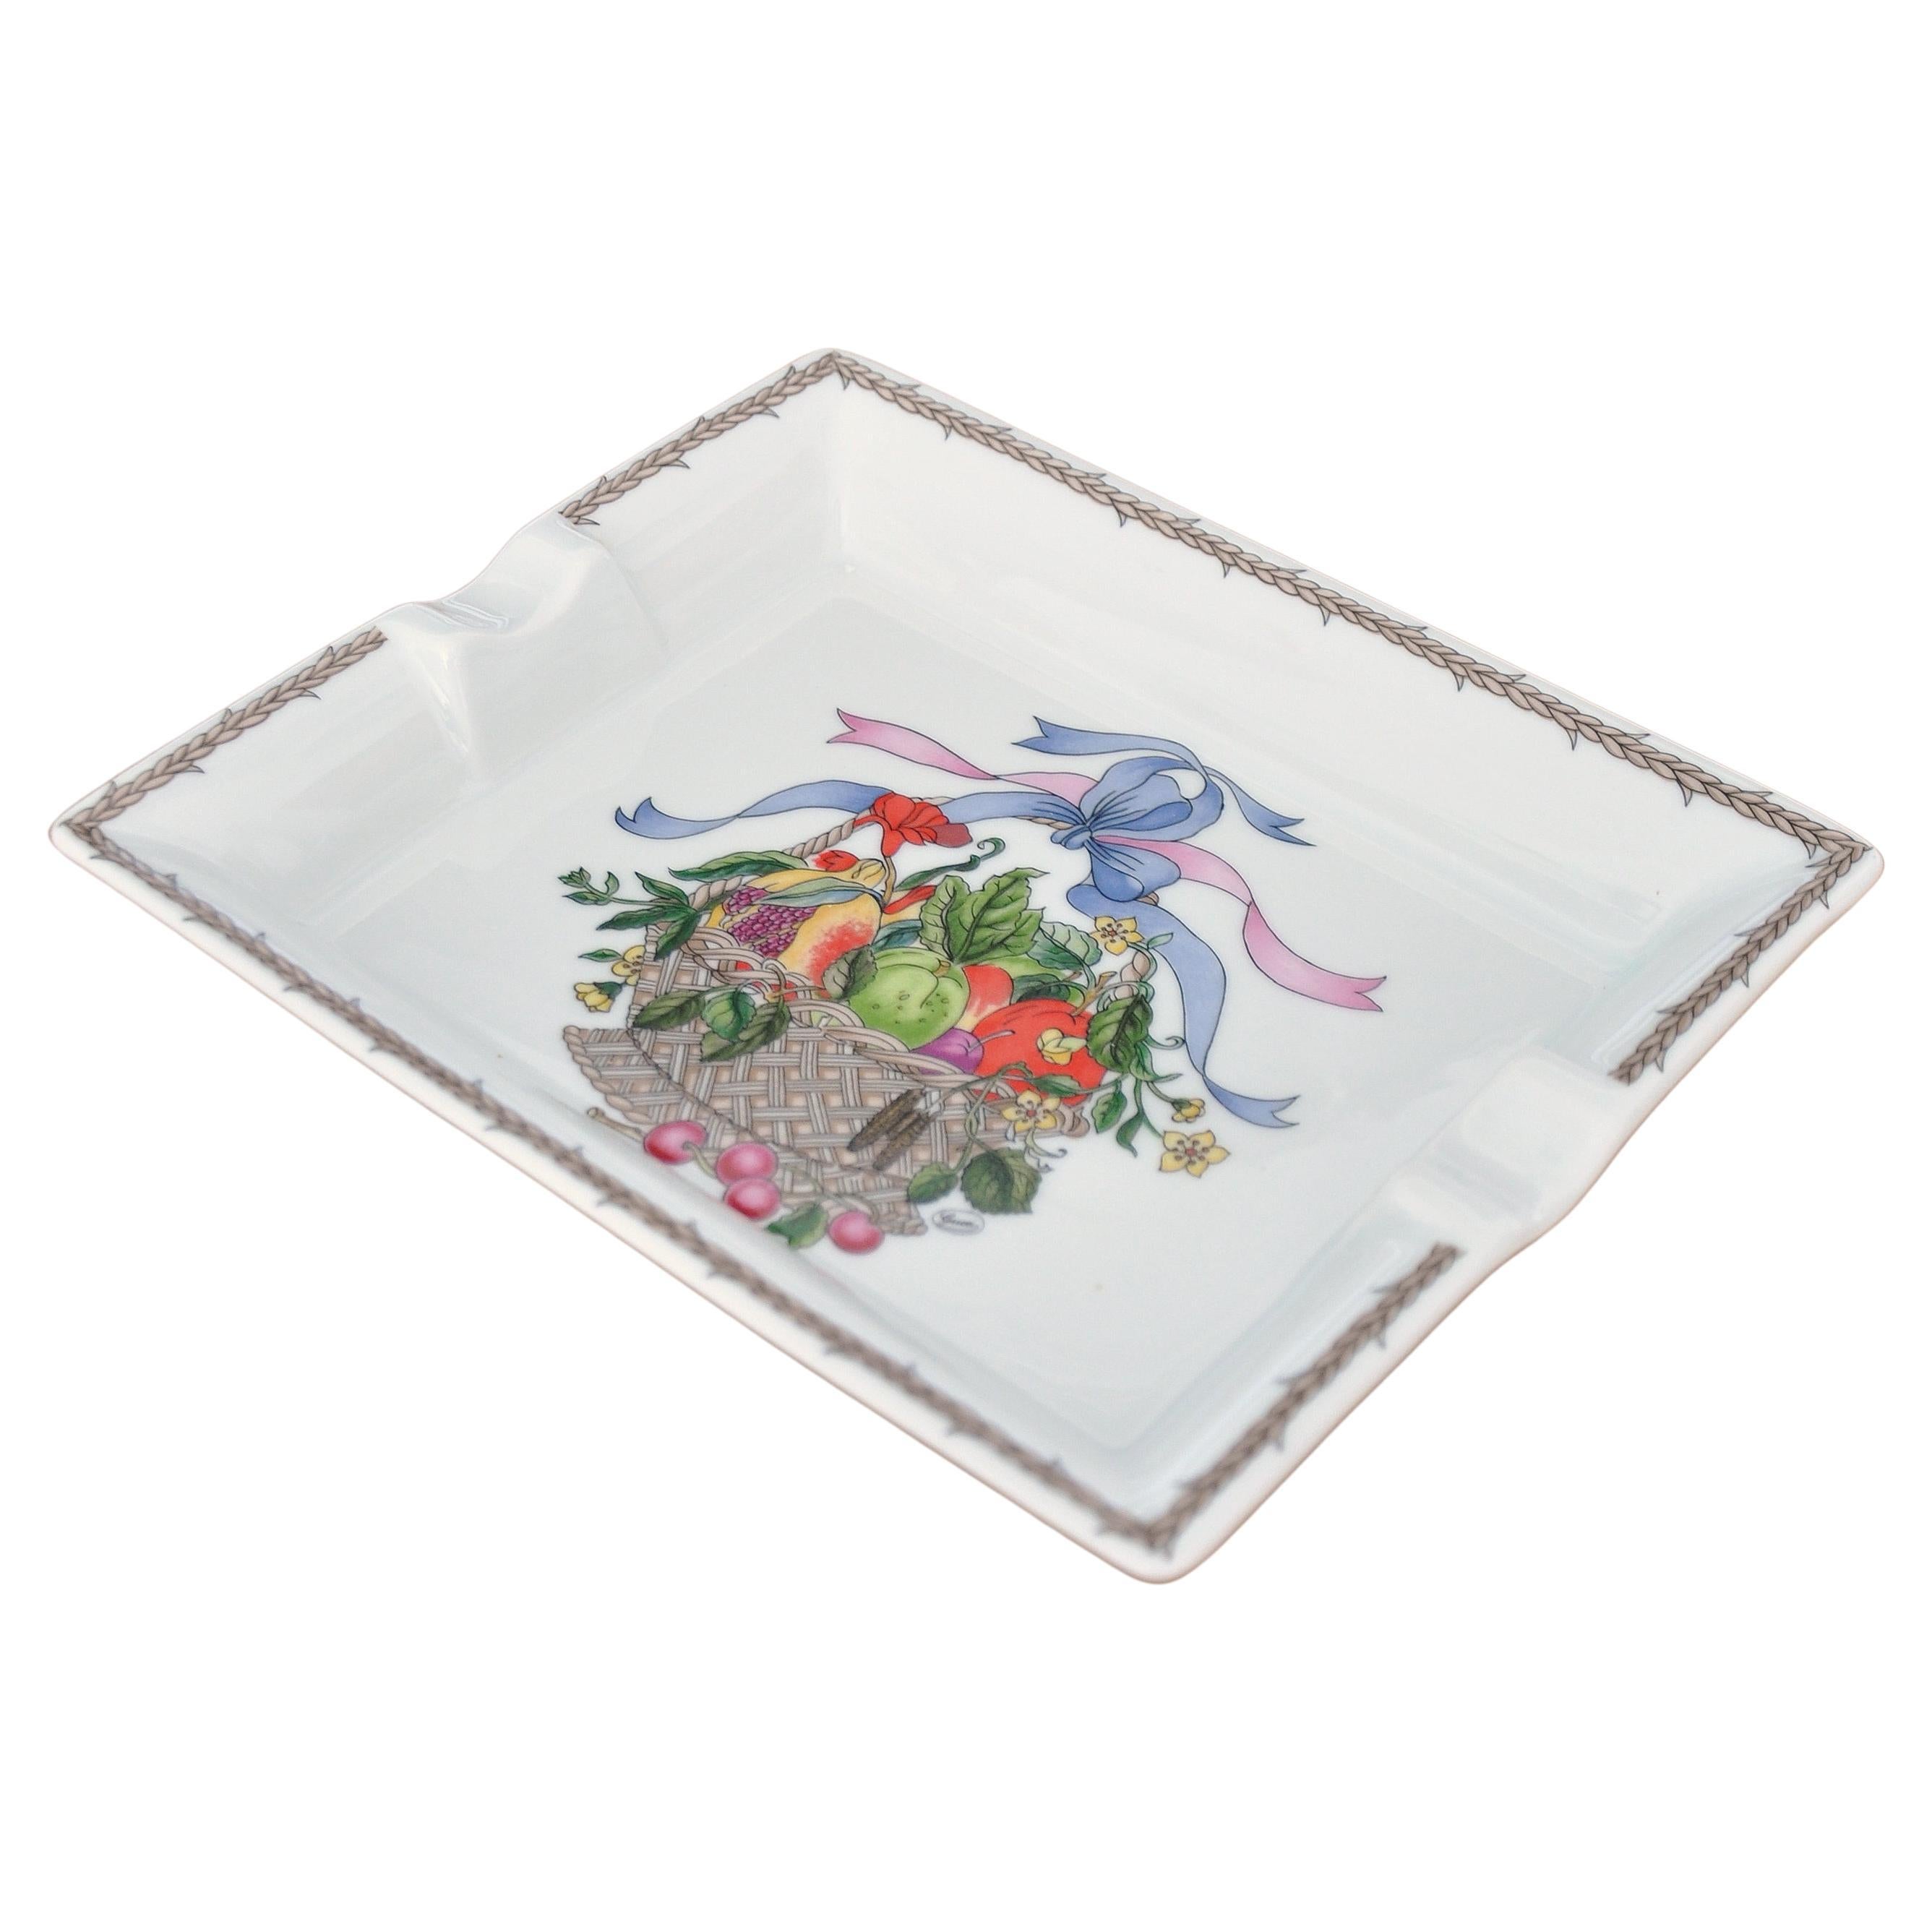 Fine porcelain Gucci cigar ashtray from the 'Cestri e Nastri' (Baskets & Ribbons) collection. Made in France by Limoges. Decorated with a basket of fruit and flowers, a blue ribbon, a pink ribbon and a braided border; all with intricate details. The